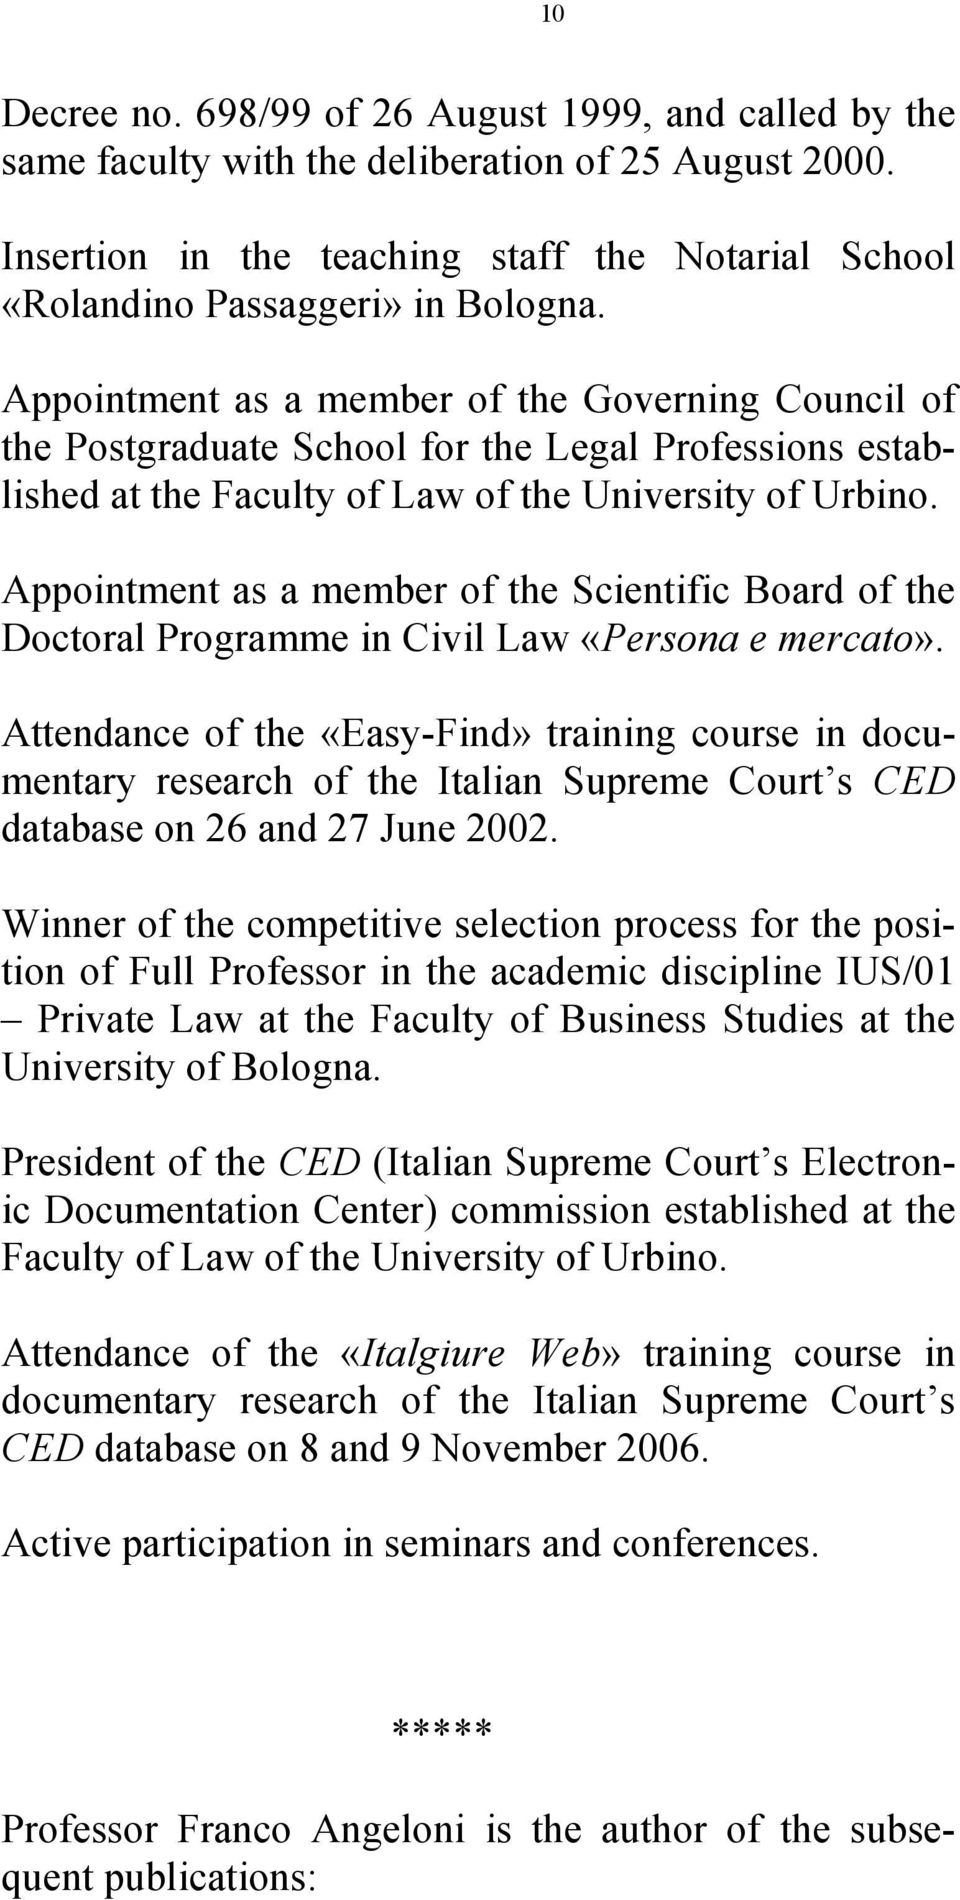 Appointment as a member of the Scientific Board of the Doctoral Programme in Civil Law «Persona e mercato».